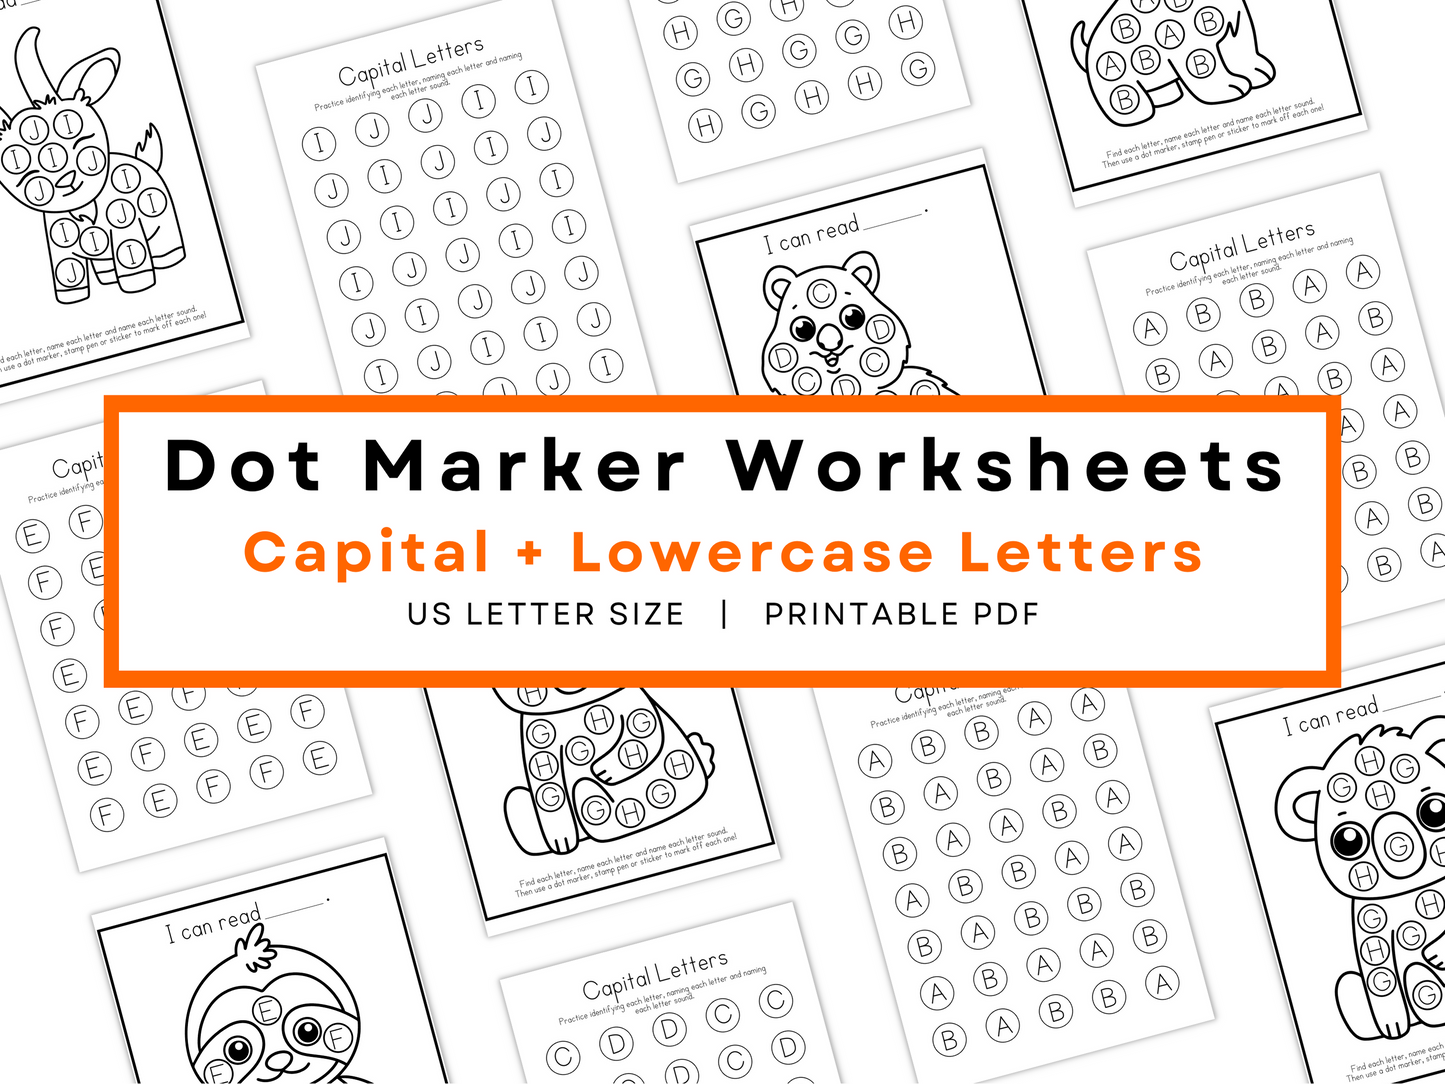 Dot Marker Alphabet Practice Coloring Pages | Capital + Lowercase Letters